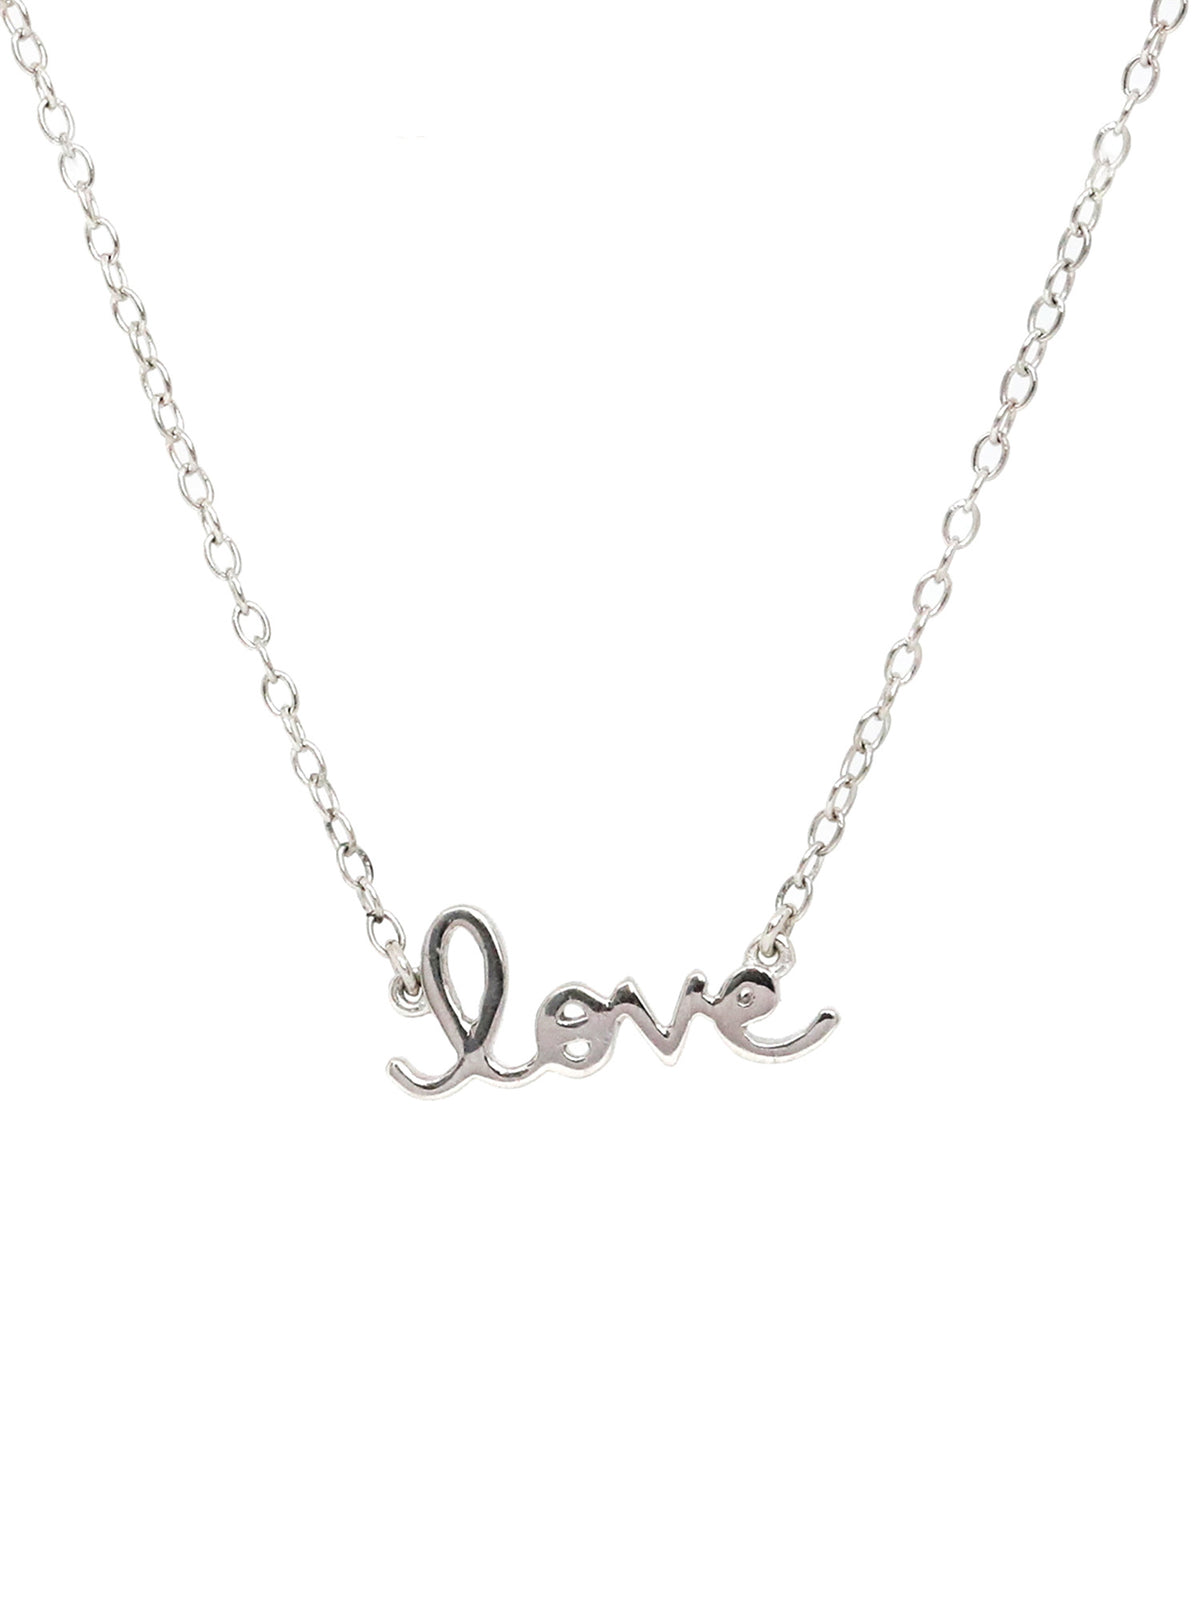 LOVE PENDANT WITH CHAIN